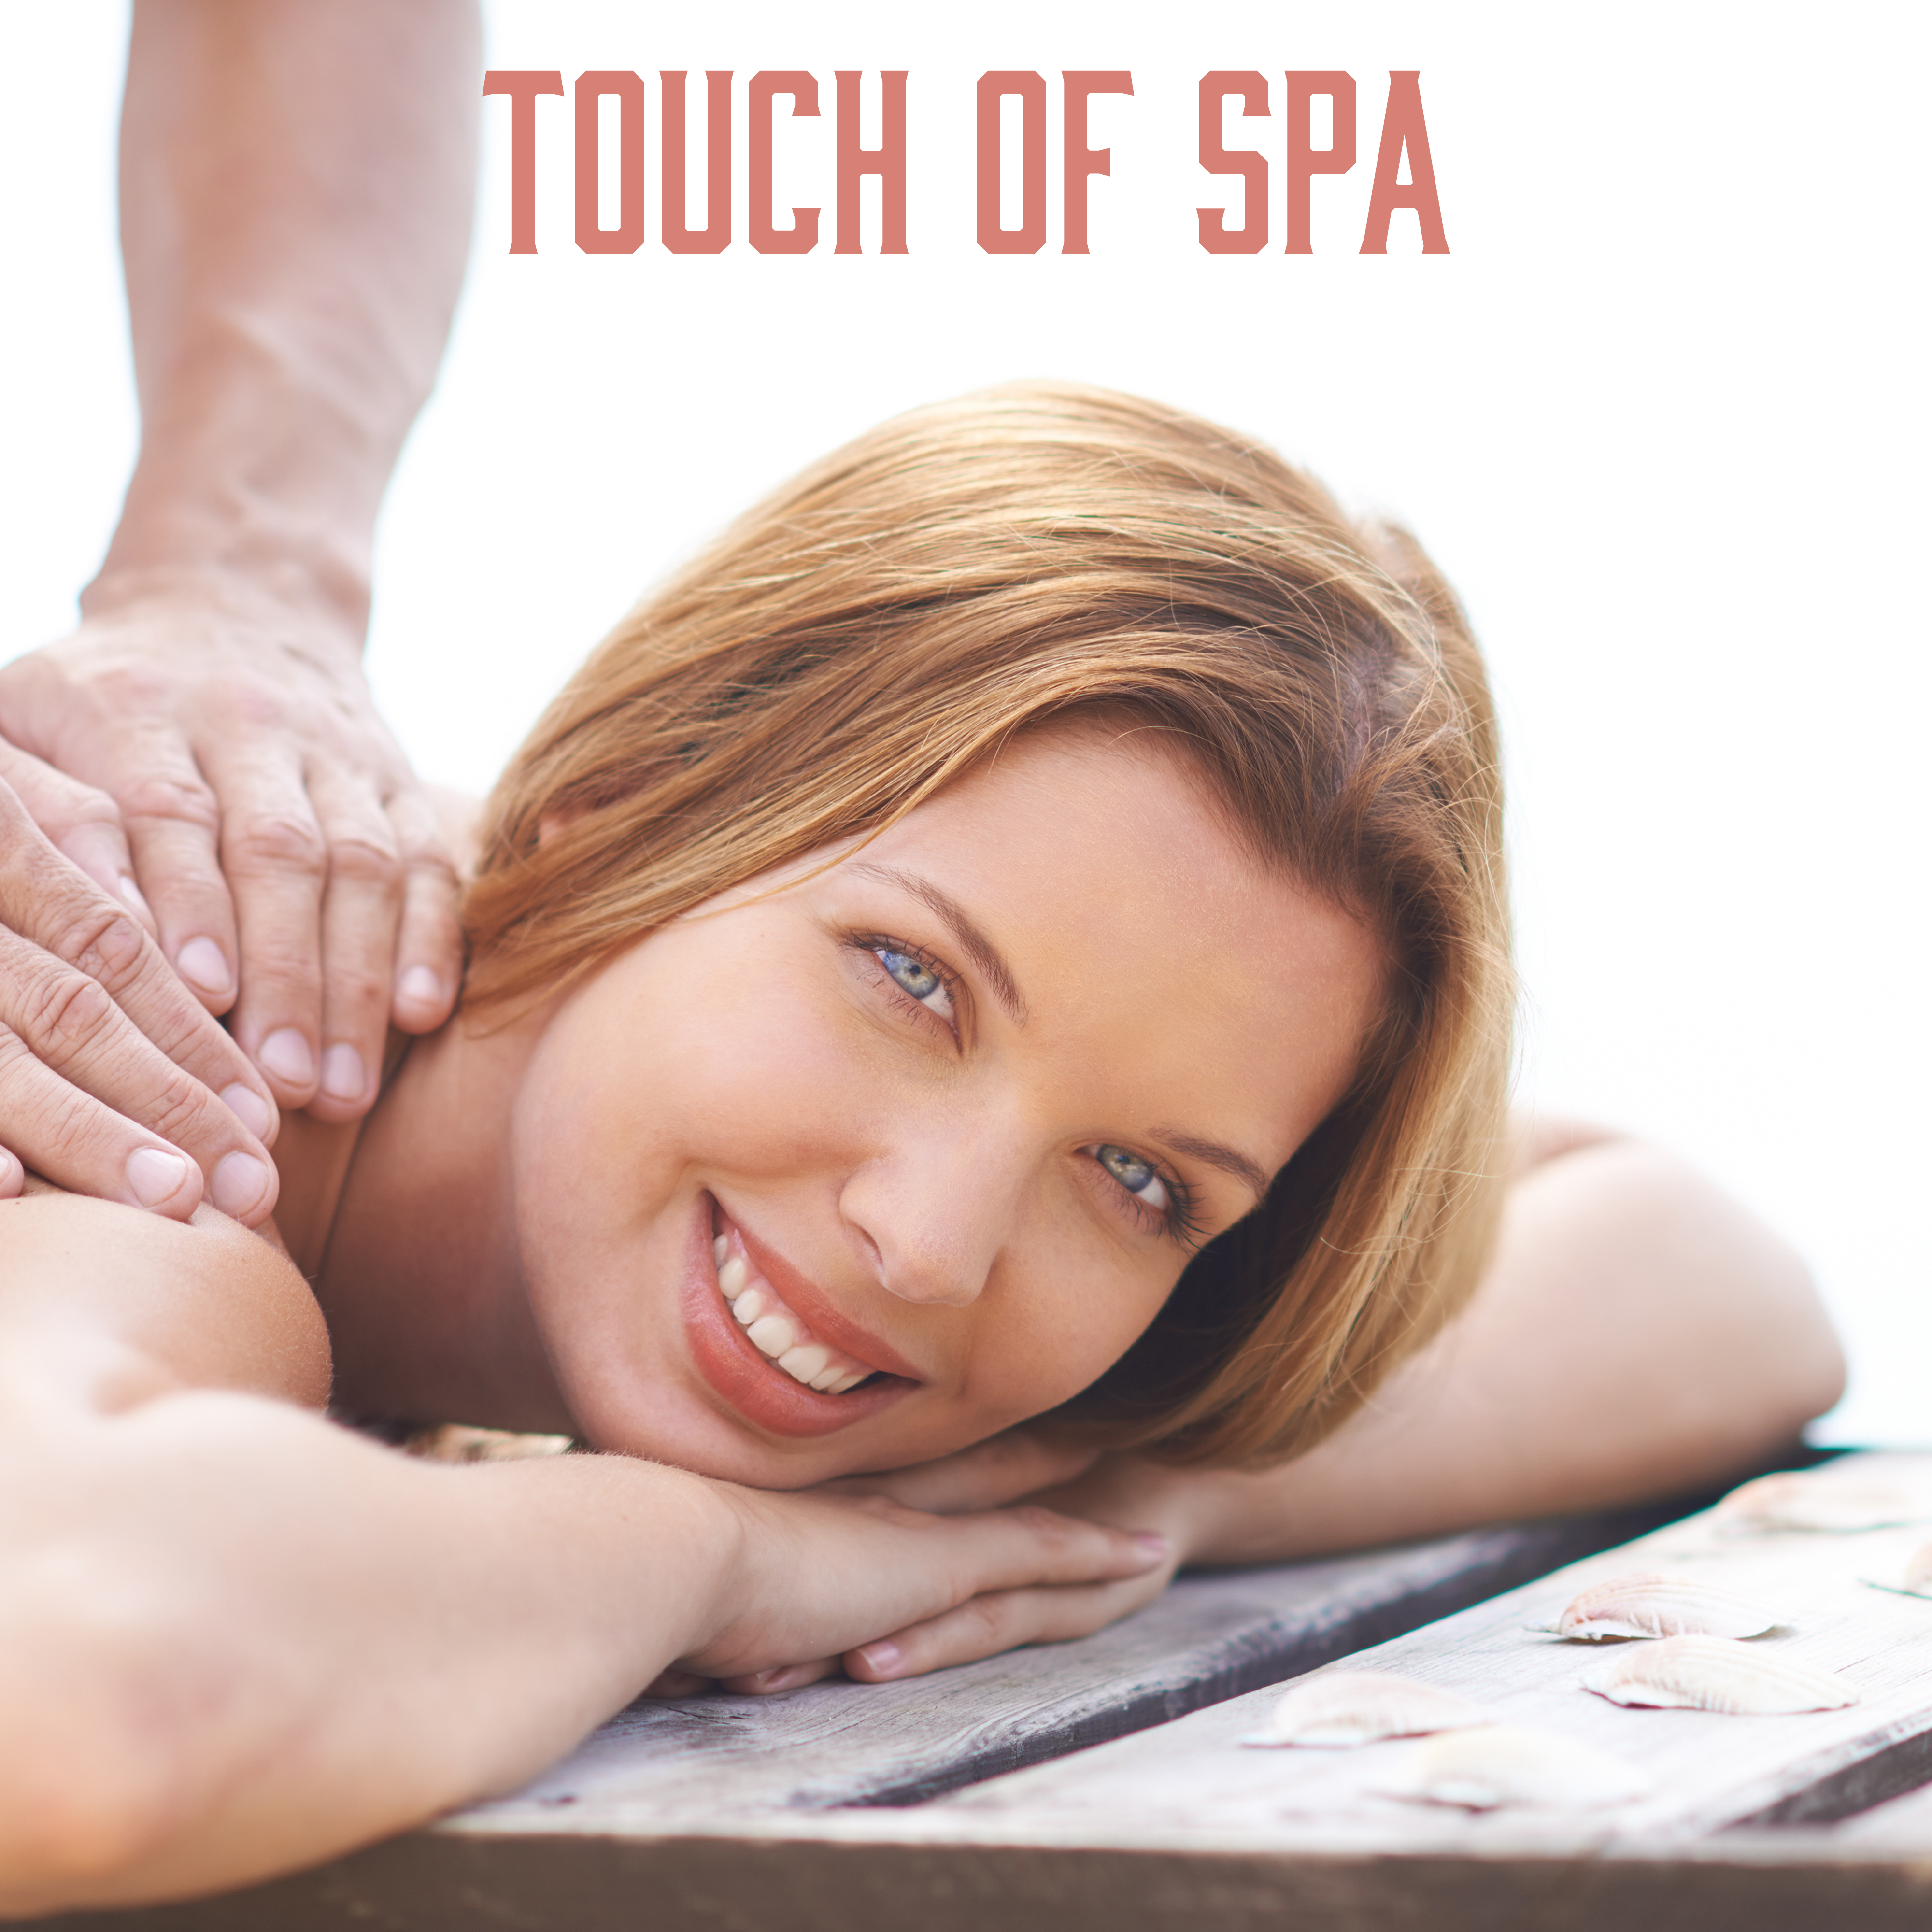 Touch of Spa – Pure Sounds of Nature for Spa, Deep Relax Music, Background Music for Massage, Spa Lounge